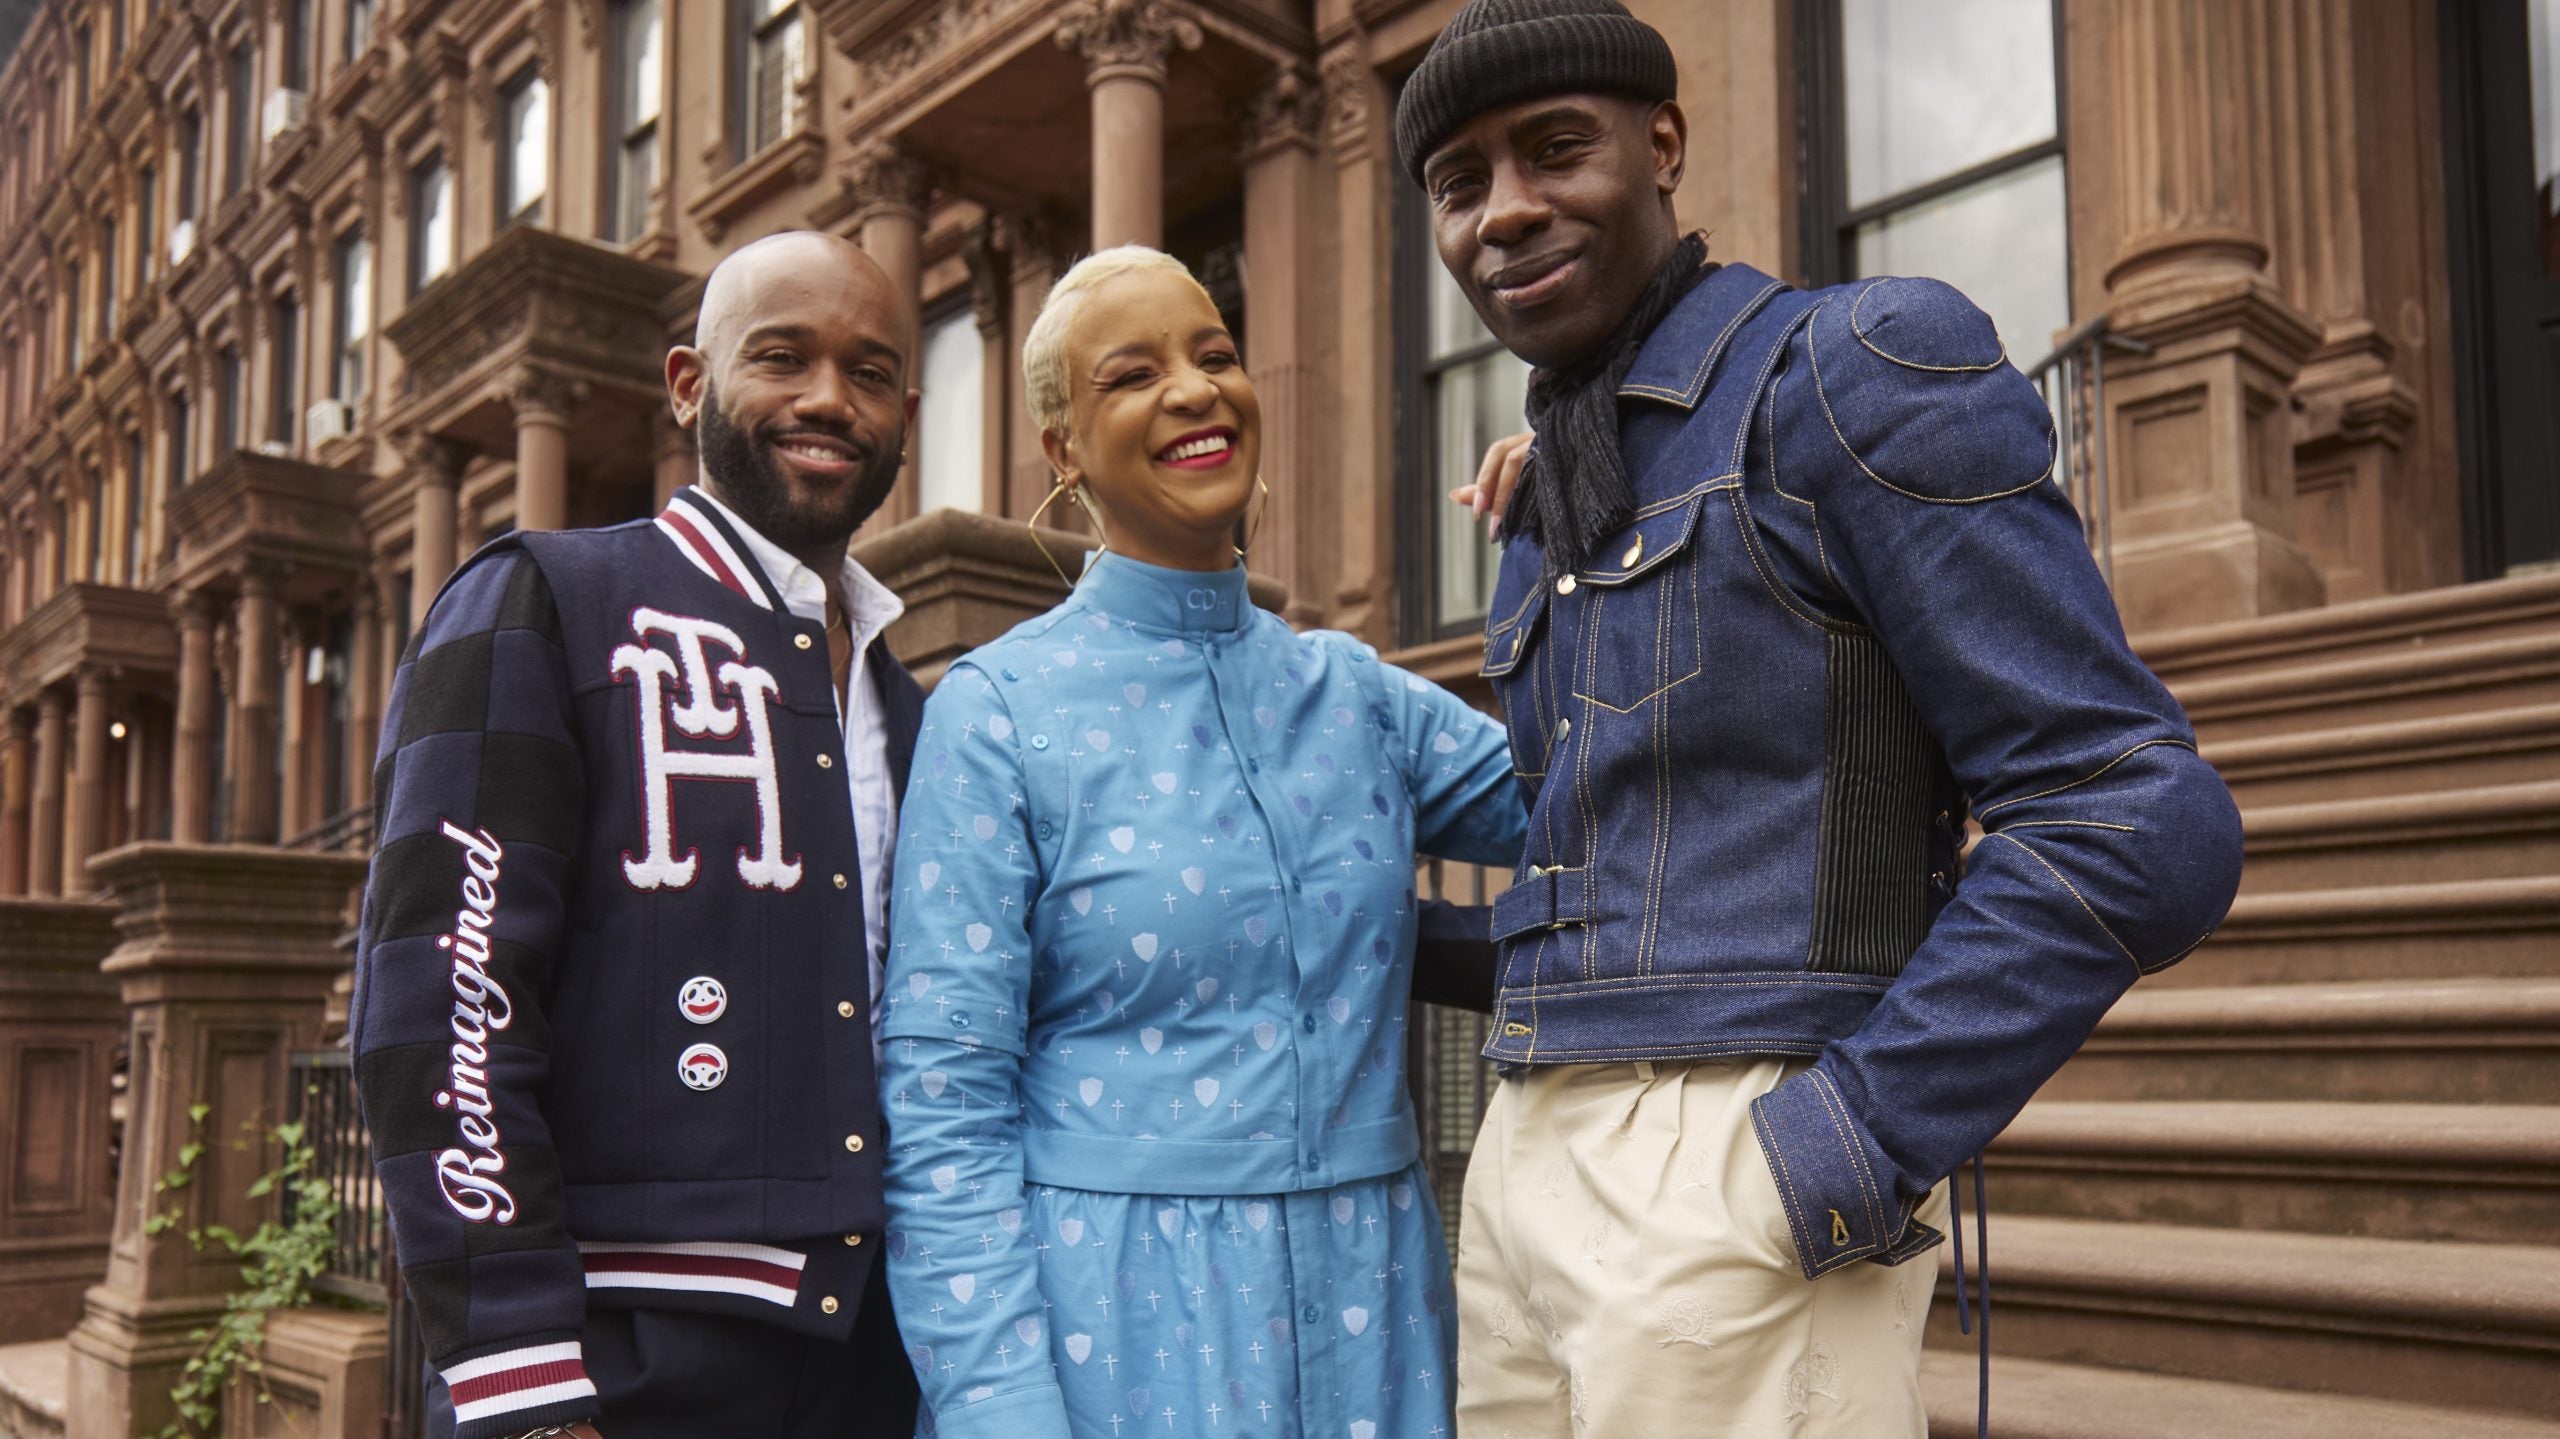 Tommy Hilfiger's Partners With Harlem Fashion Row To Highlight BIPOC  Designers